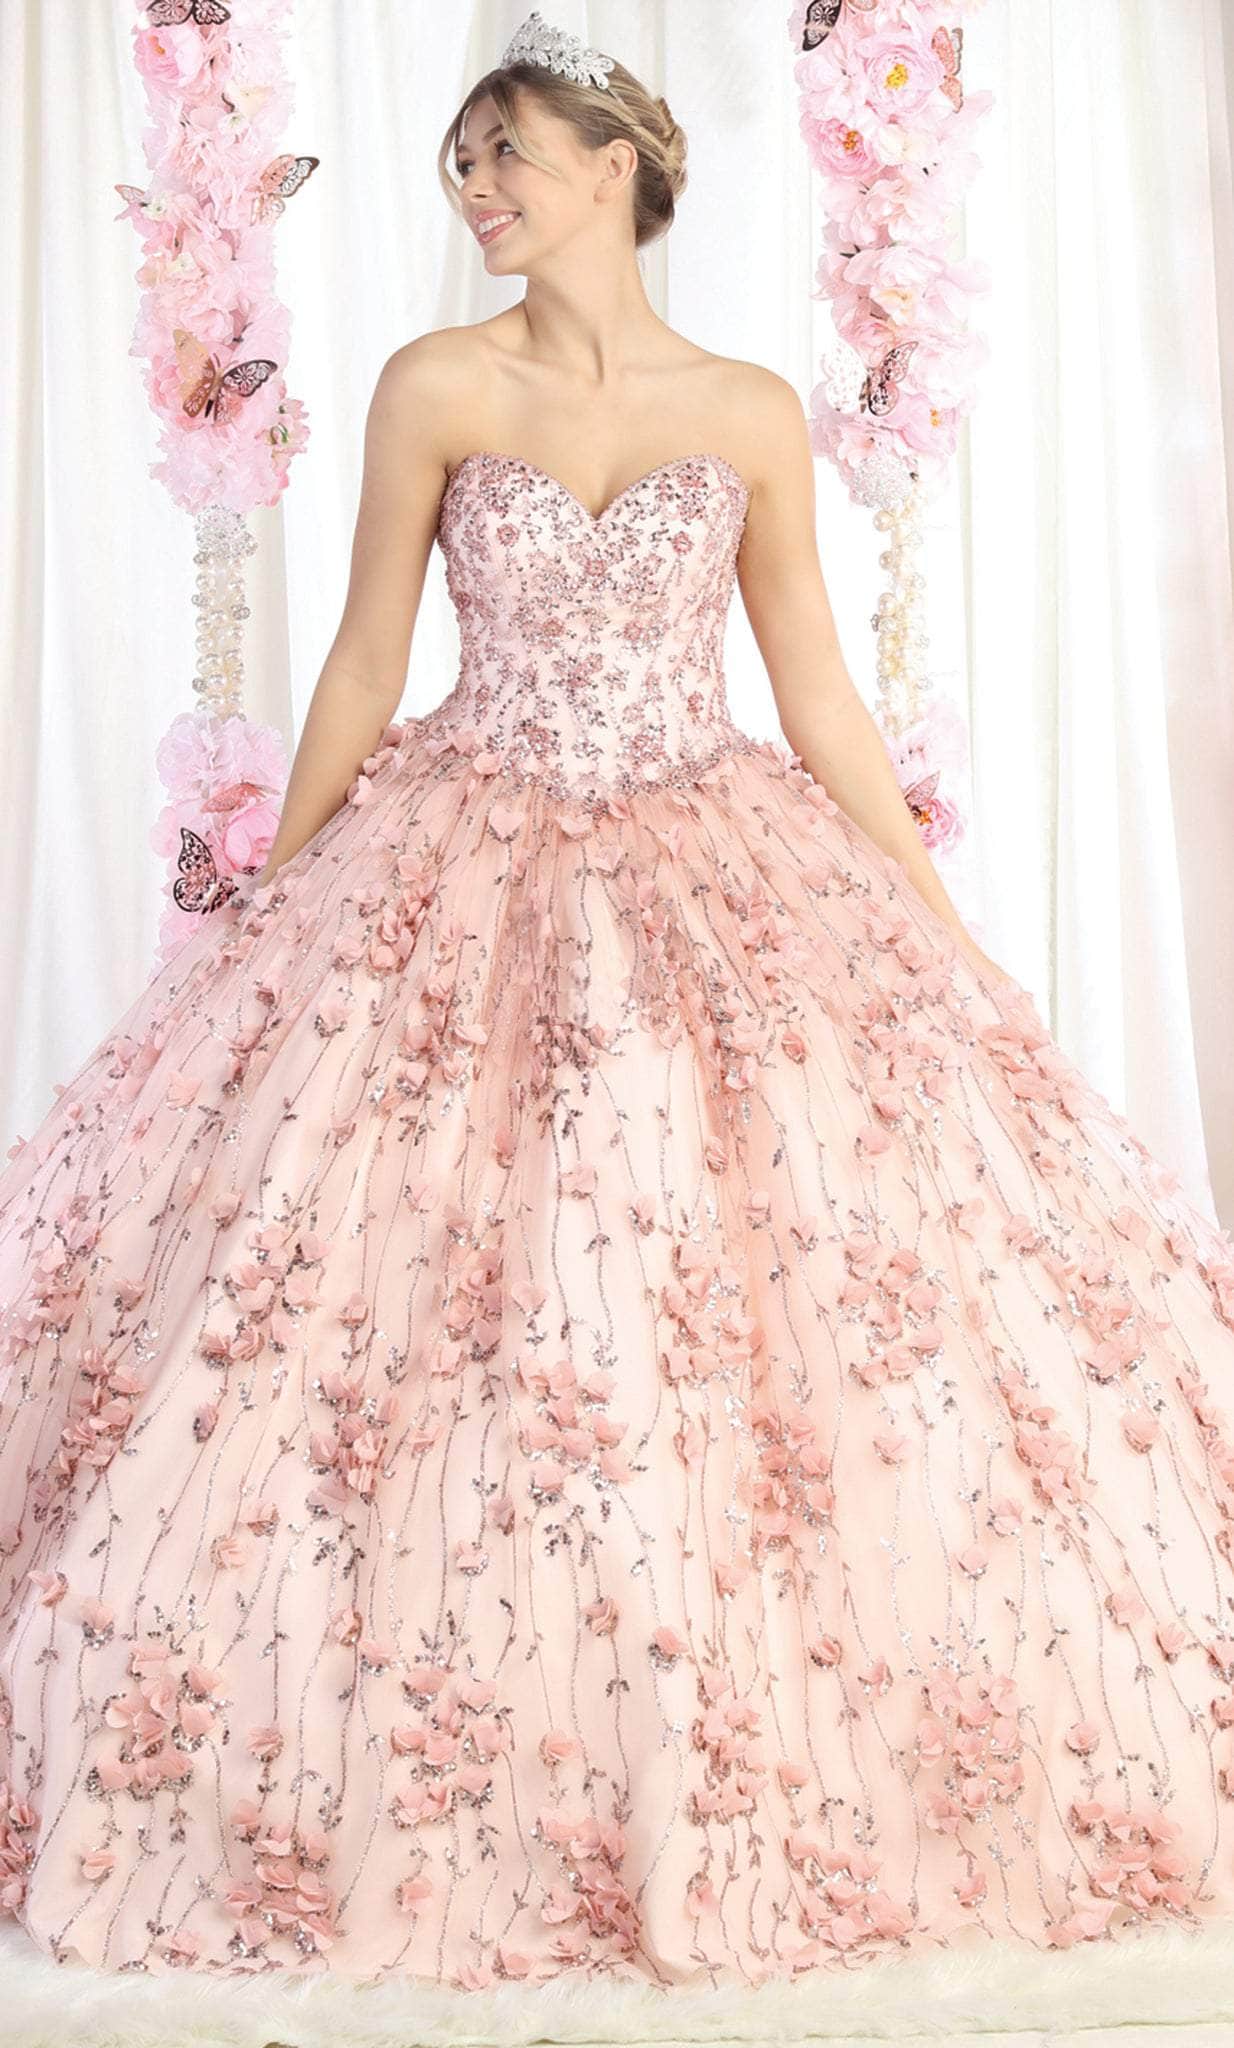 Image of May Queen LK190 - Strapless Quinceanera Ballgown